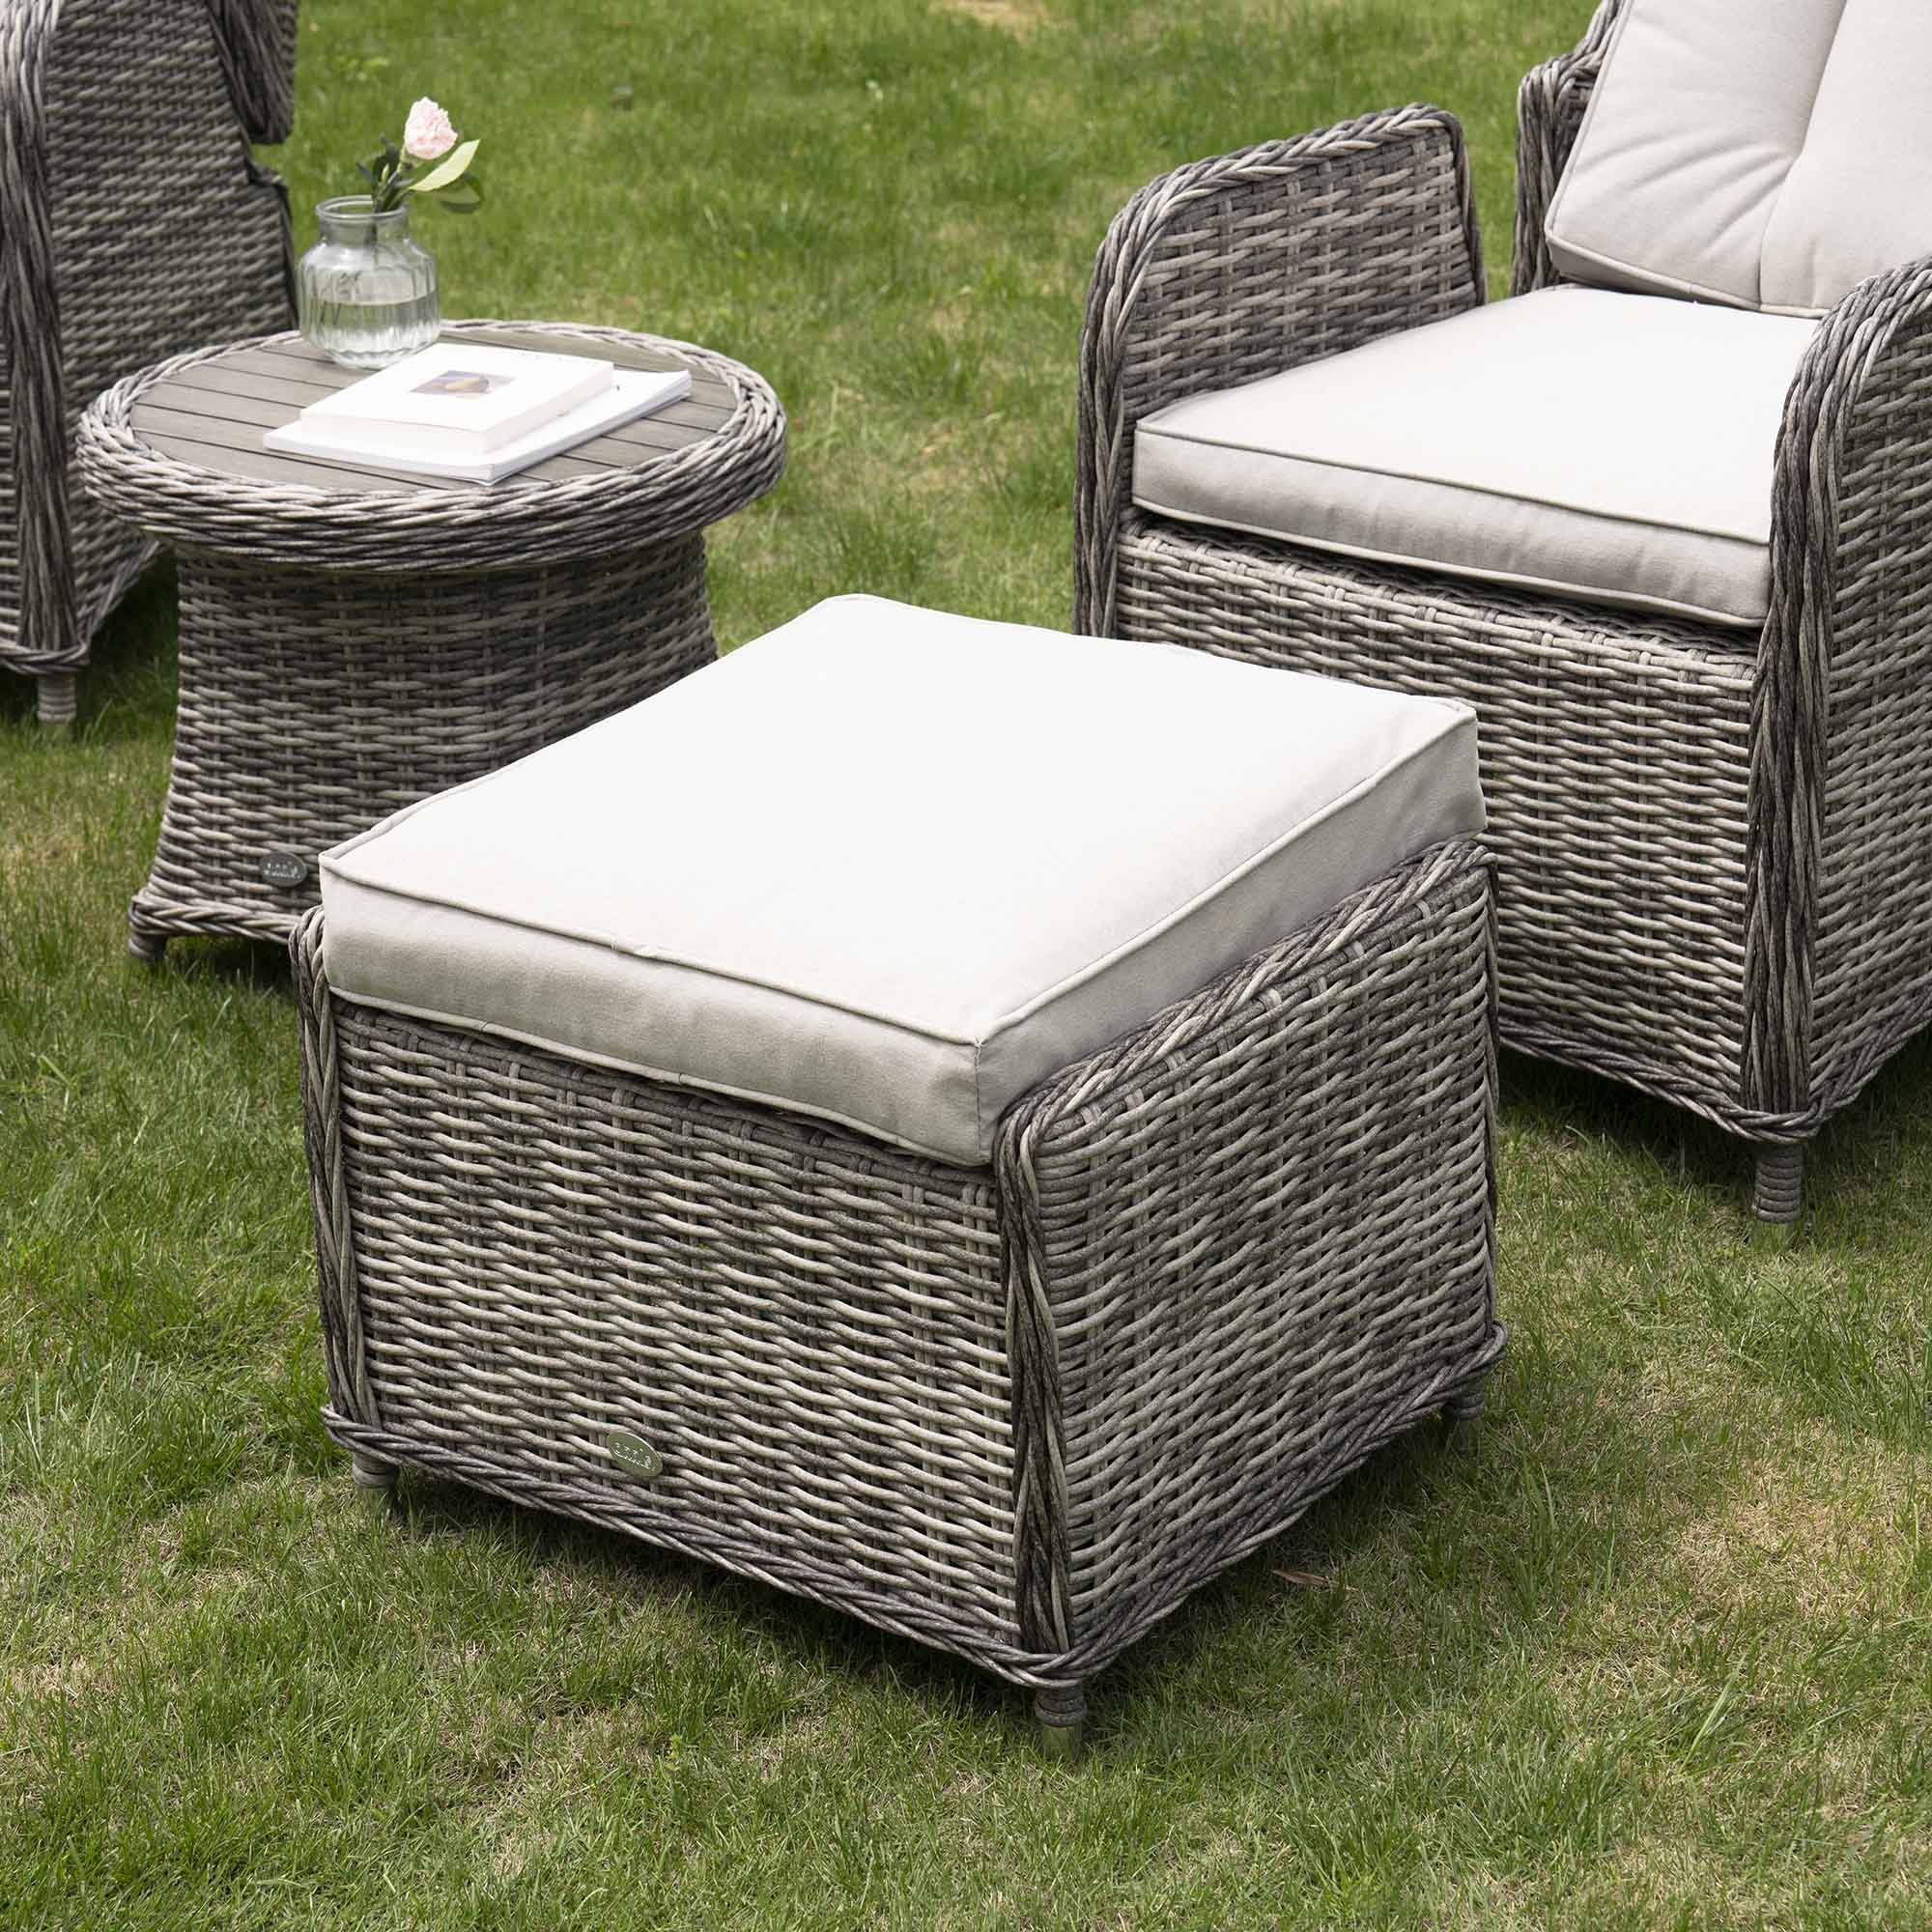 Hampshire 2-Seater Round Wicker Reclining Bistro Set with Stools, Light Grey